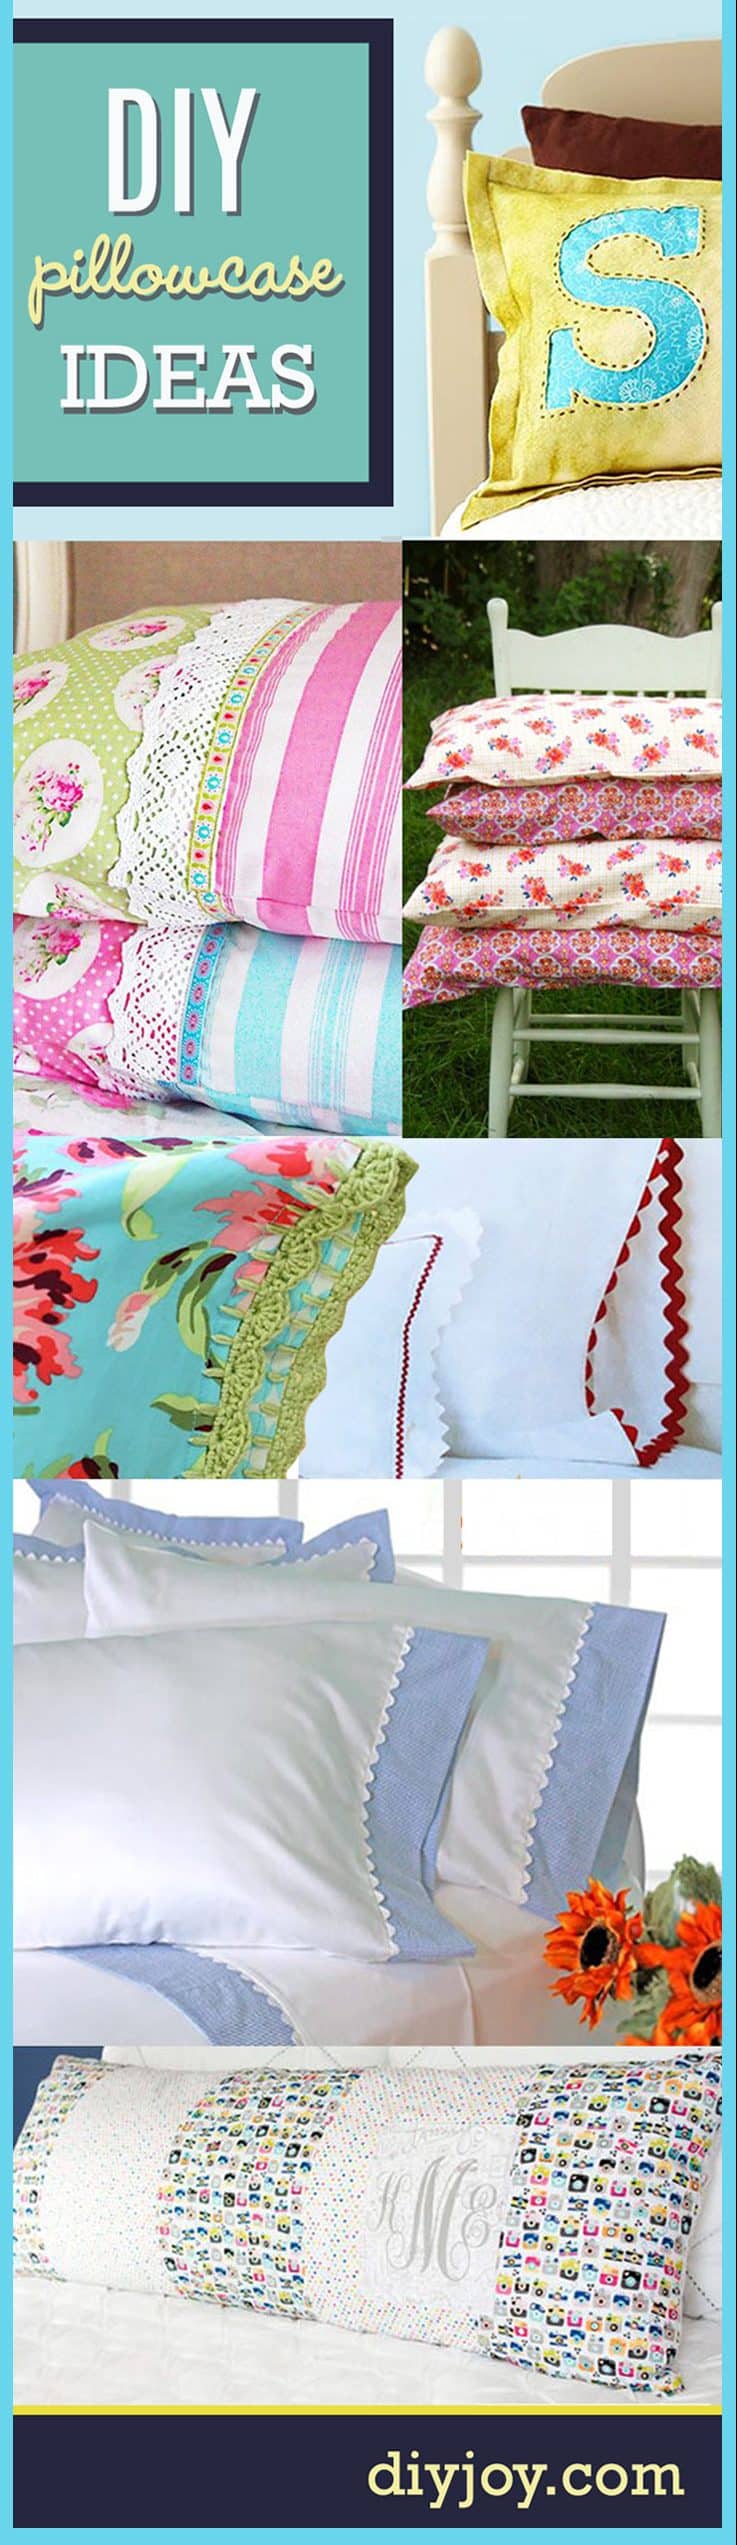 Sewing Projects for The Home - Sewing Tutorials for Pillowcases - How to Make A Pillowcase -DIY Pillowcase Ideas Pinterest